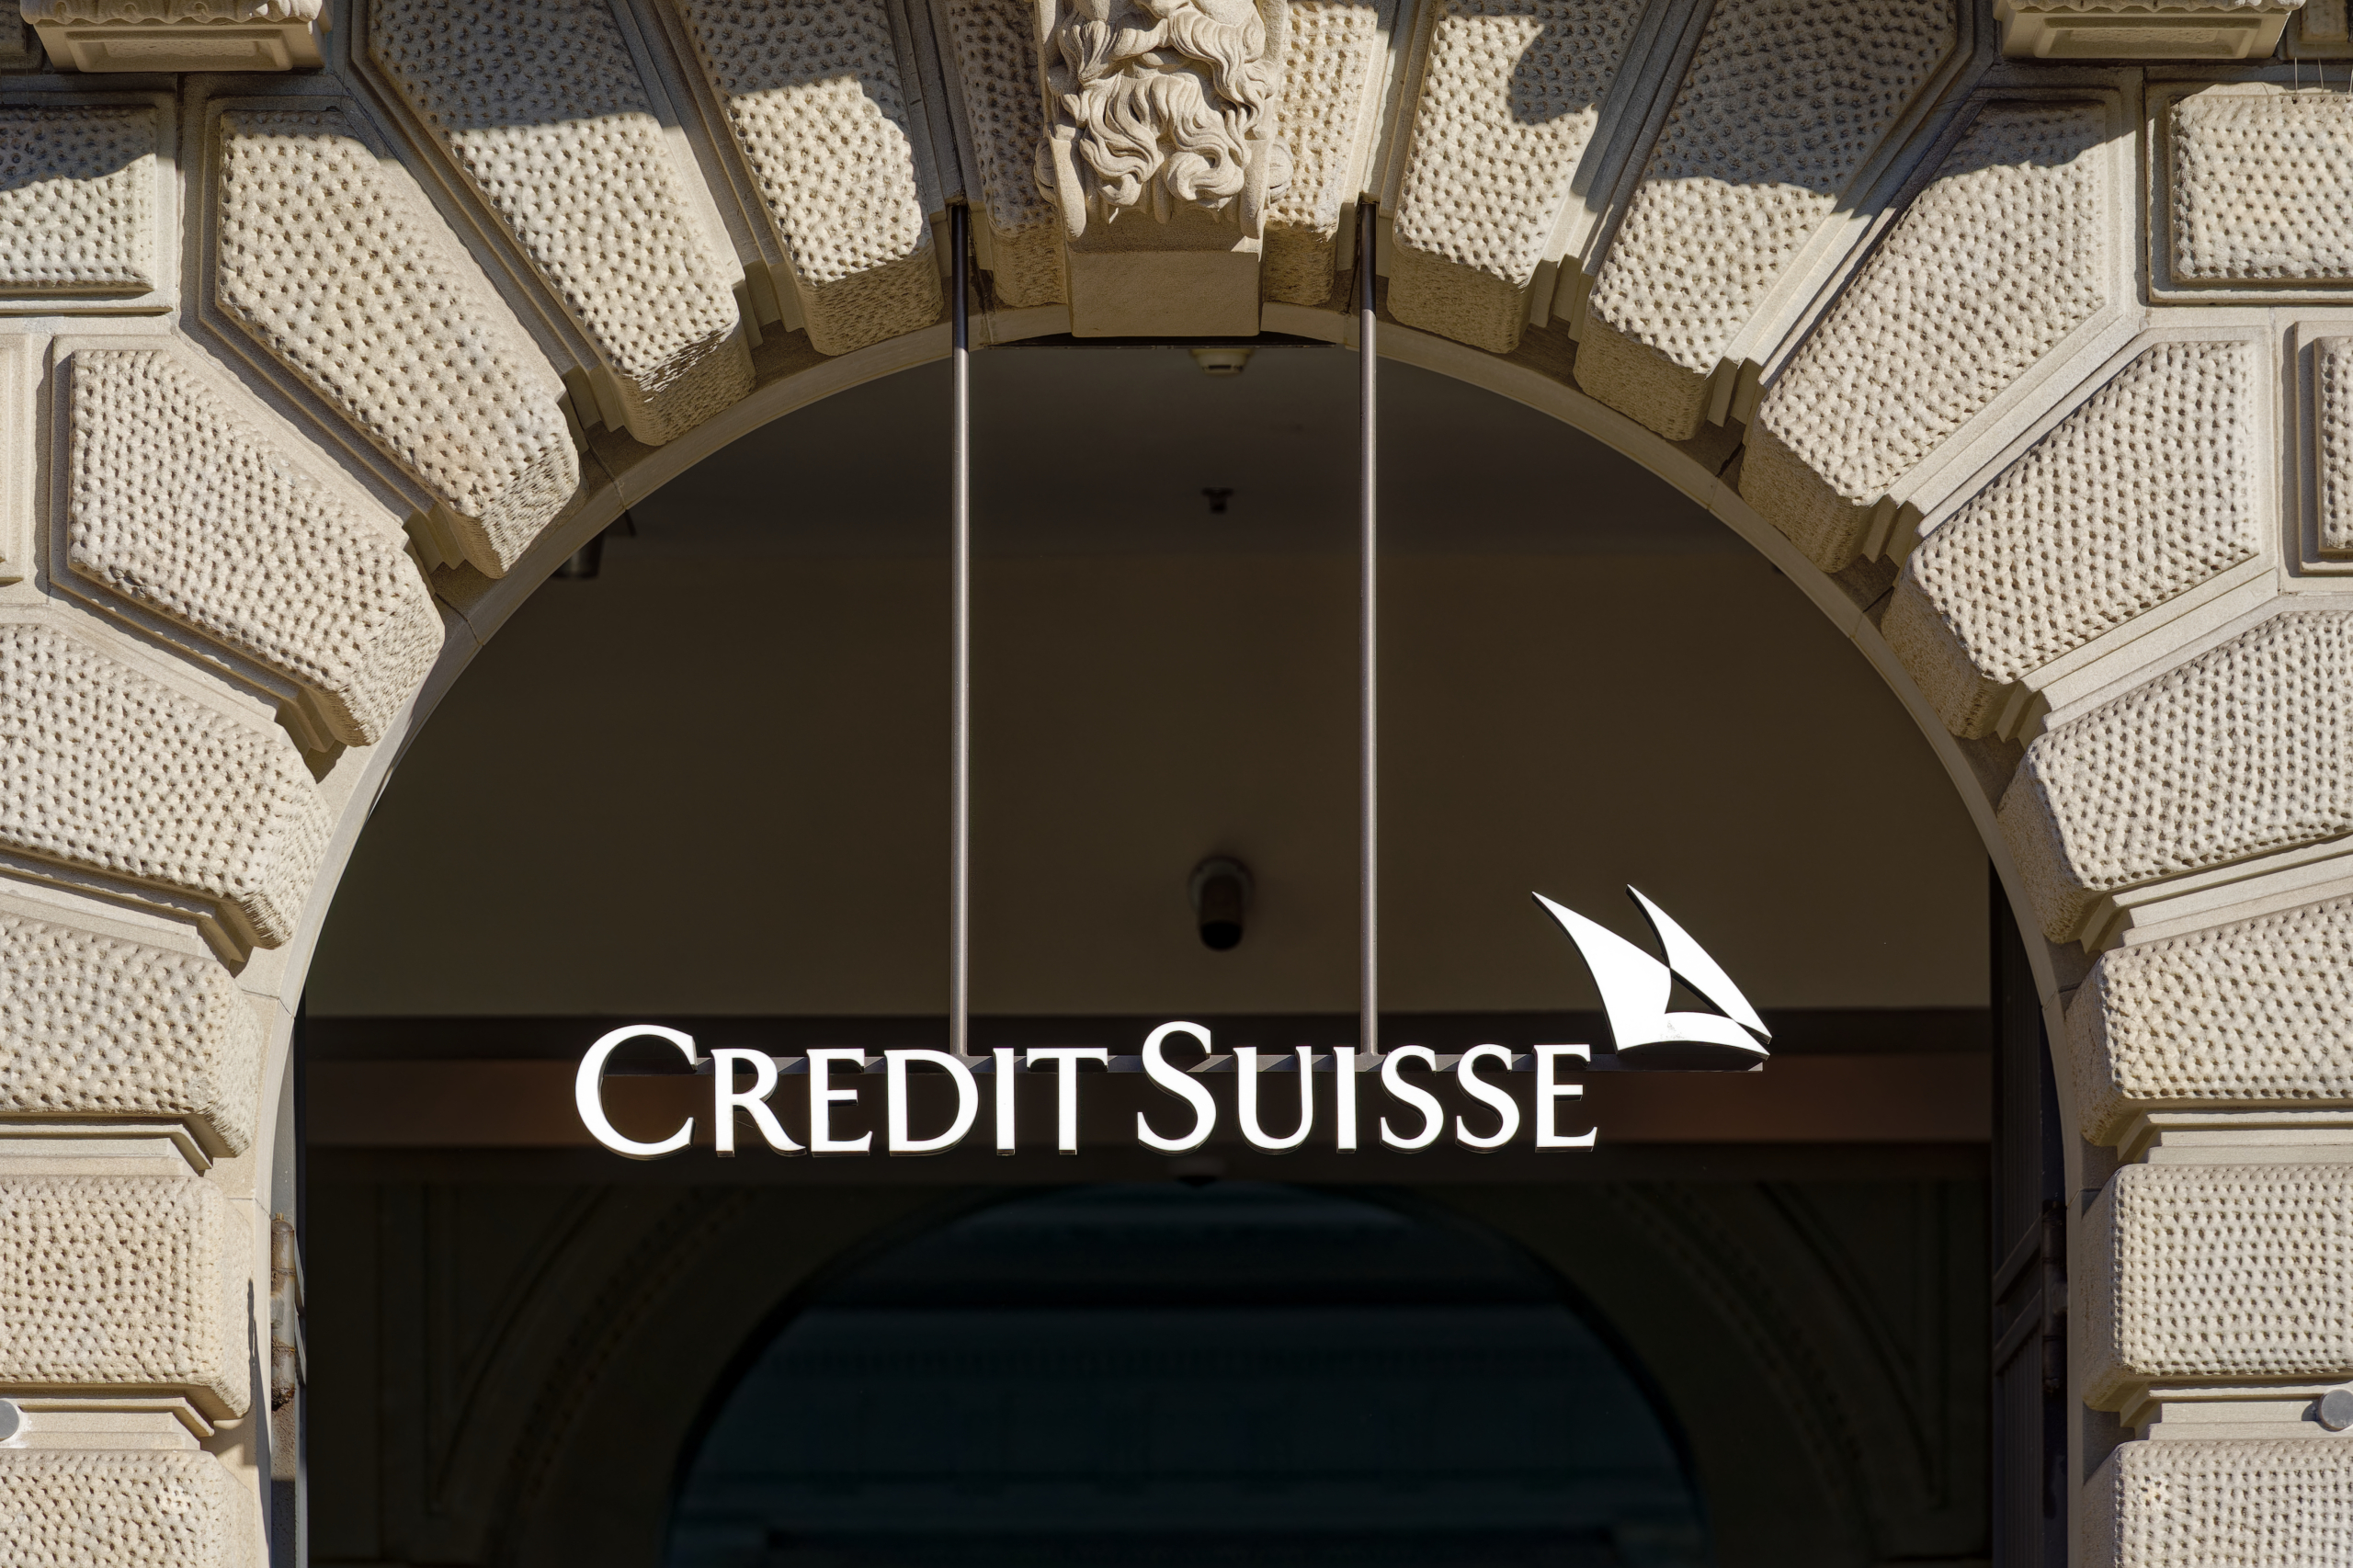 Banking giant UBS earns $35 billion to 'rescue' Credit Suisse
